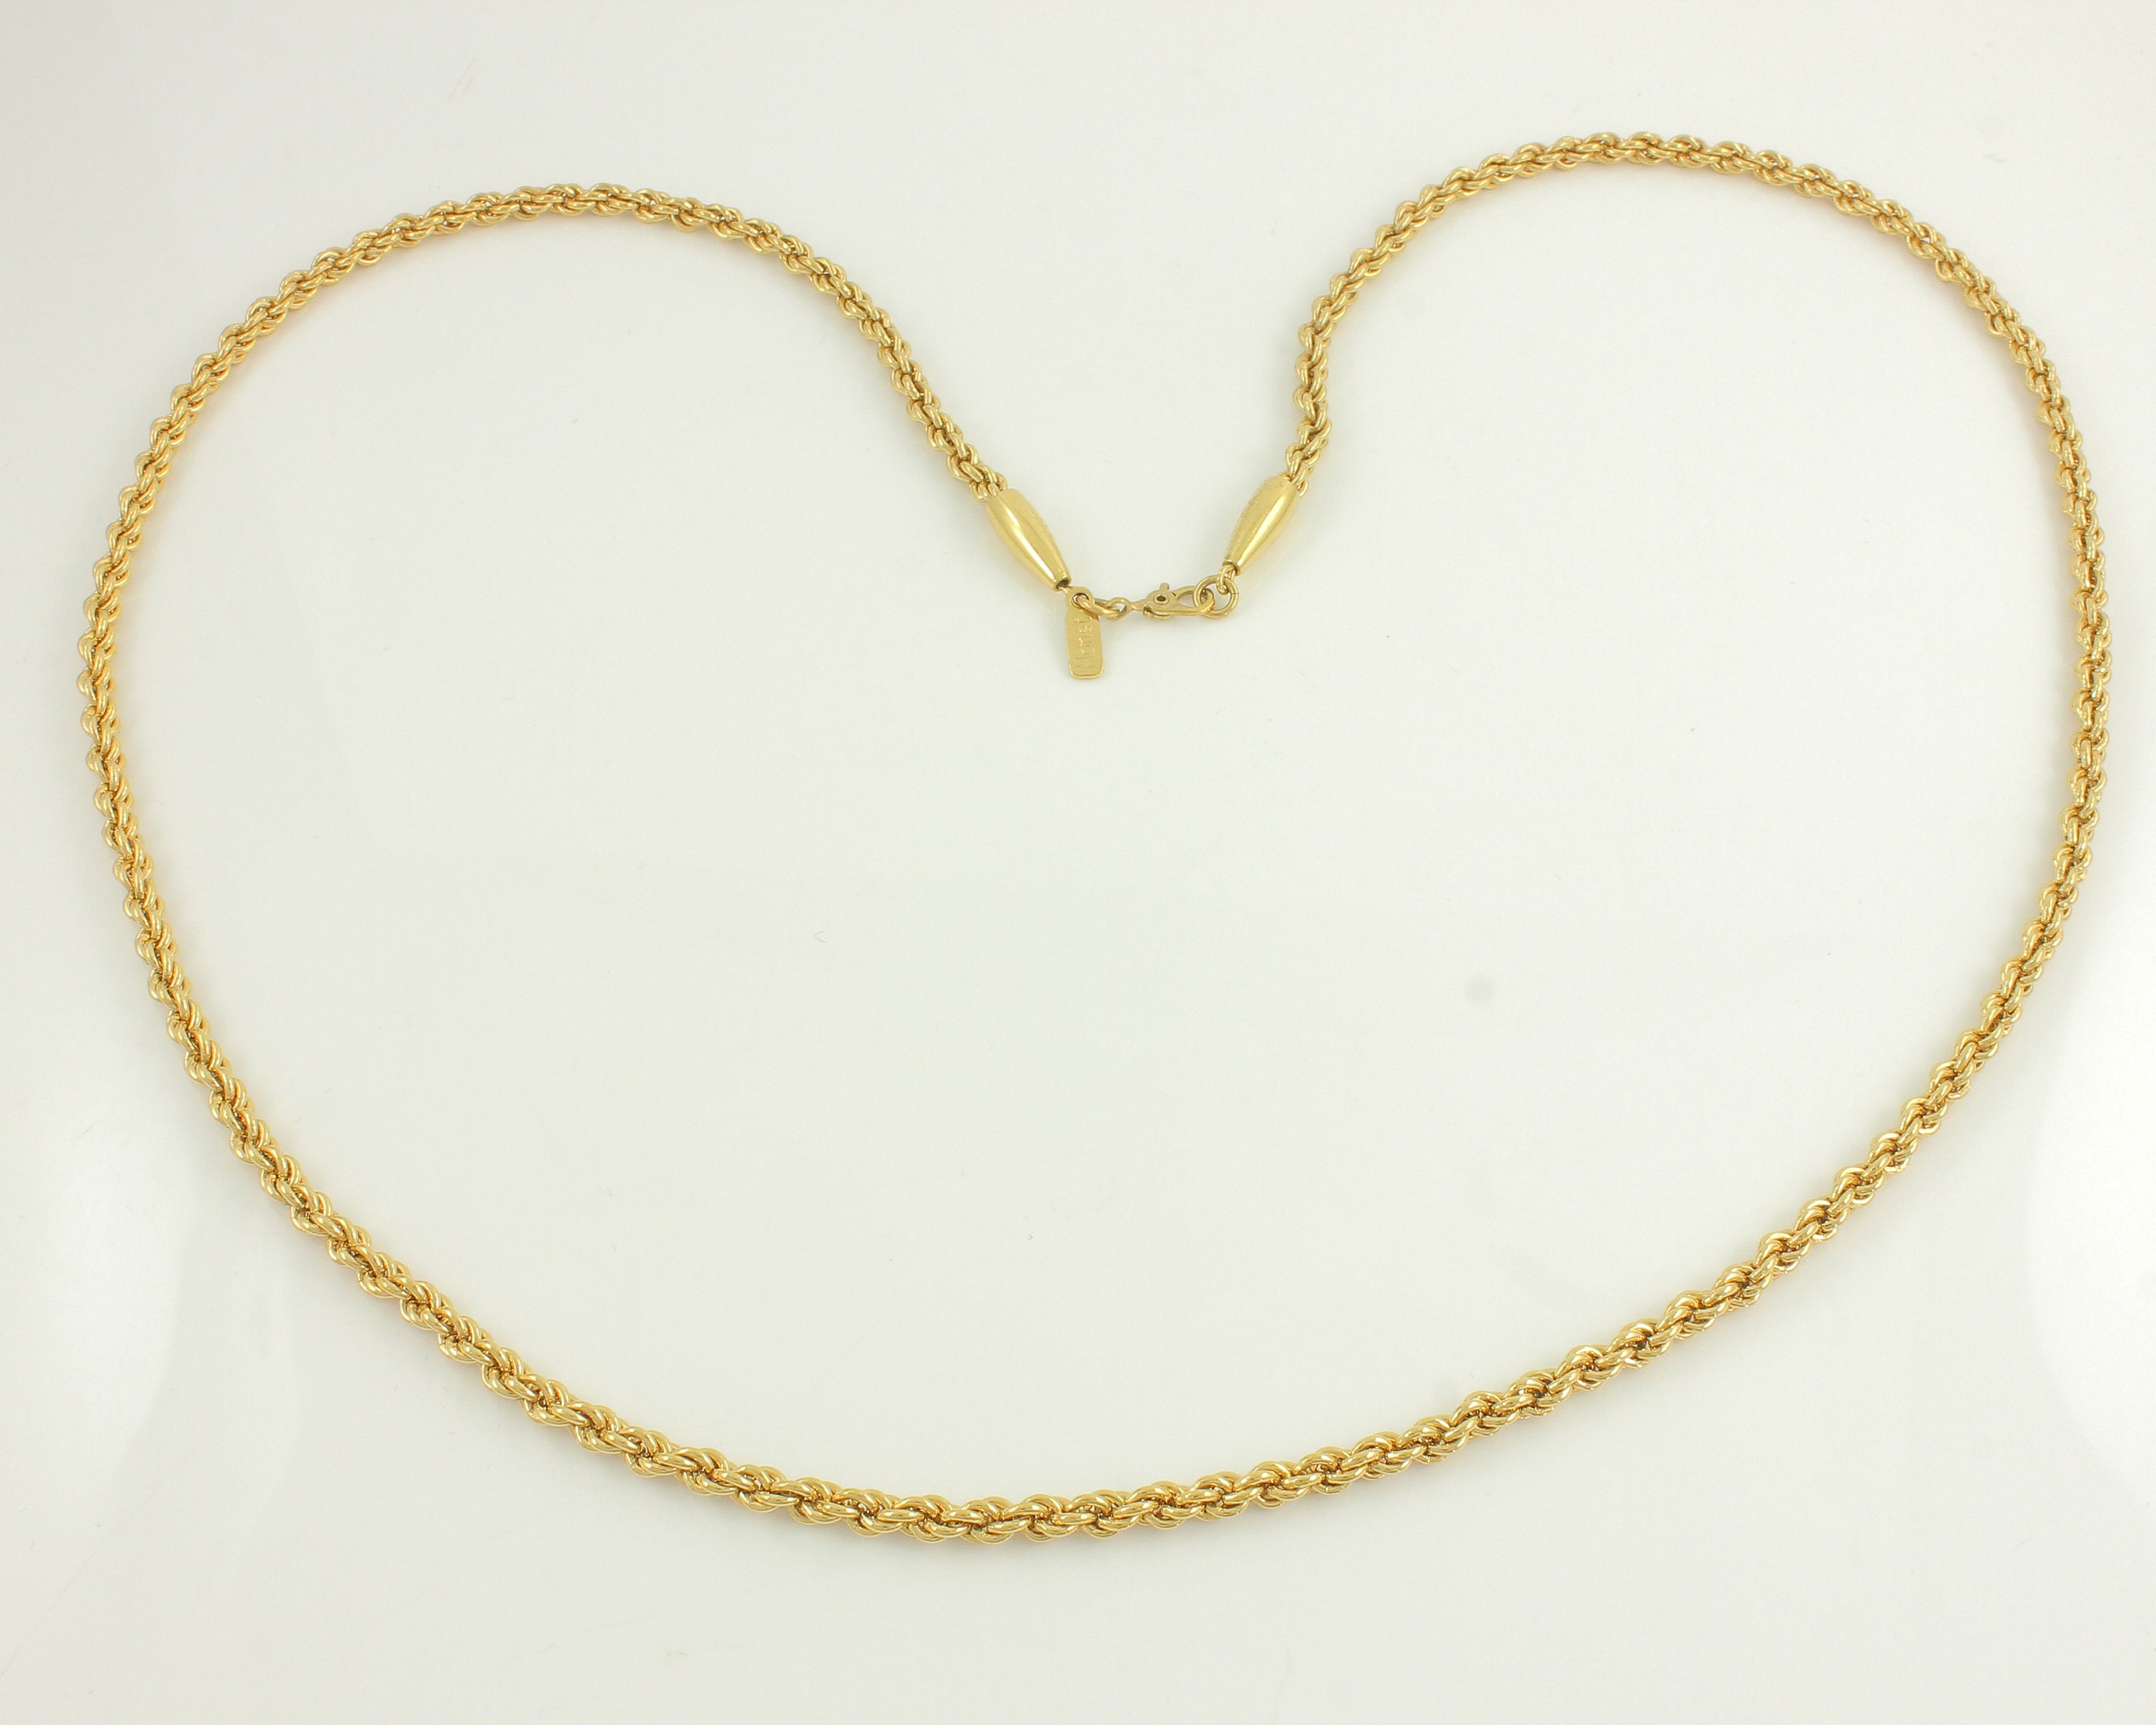 Buy Monet Shiny Gold Tone Long Heavy Chain Necklace, With 3 Decorative  Links Online in India - Etsy